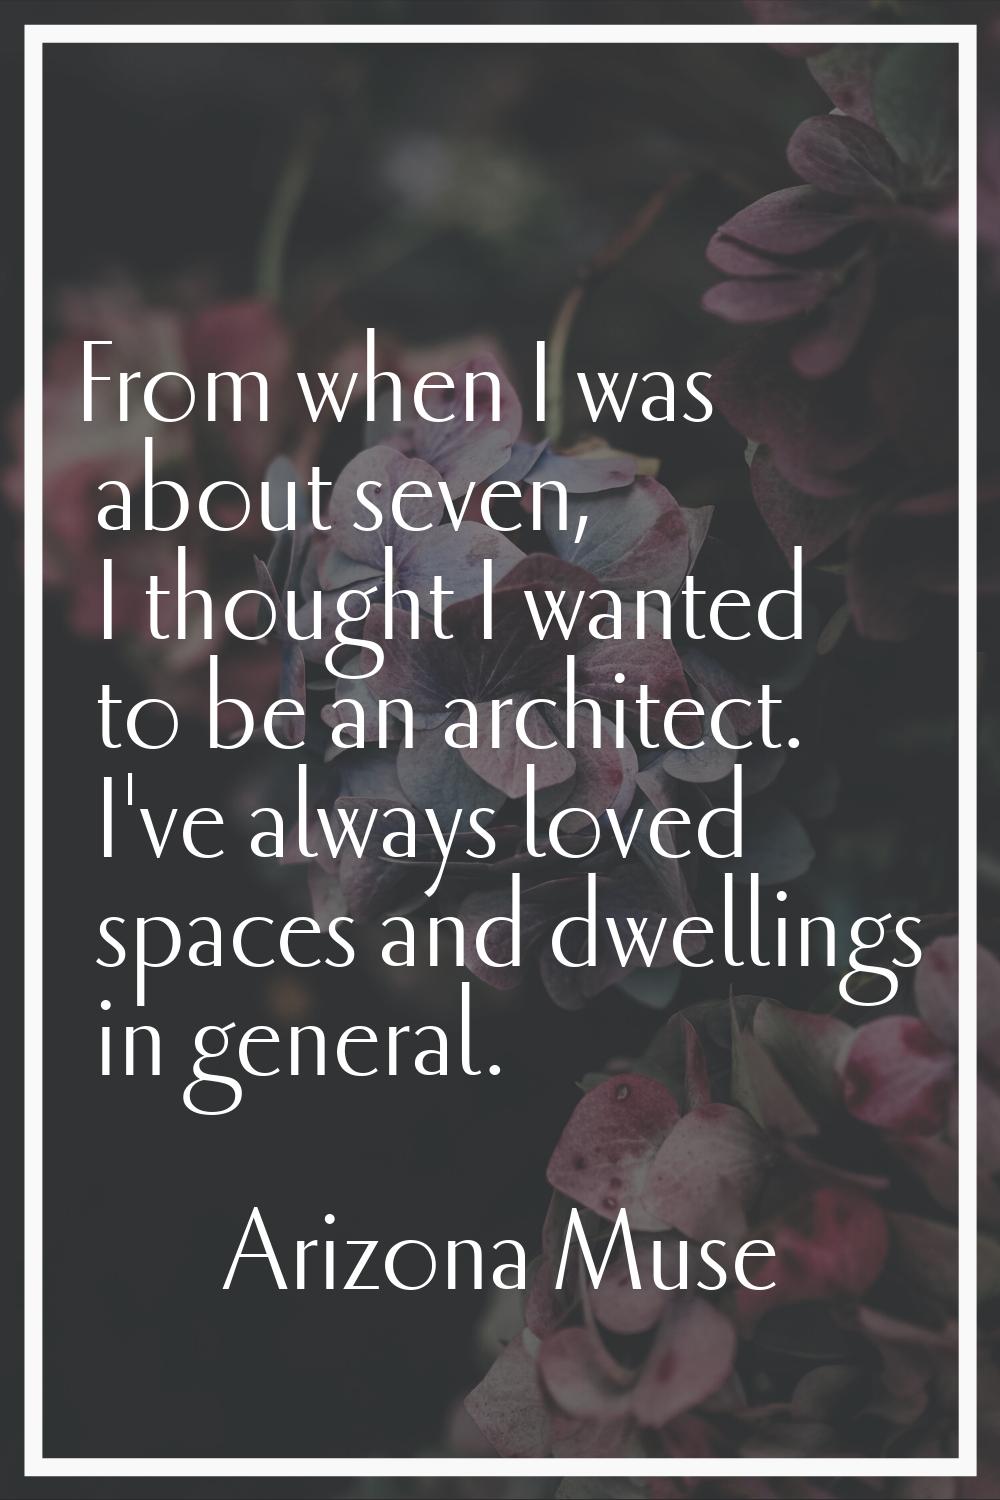 From when I was about seven, I thought I wanted to be an architect. I've always loved spaces and dw